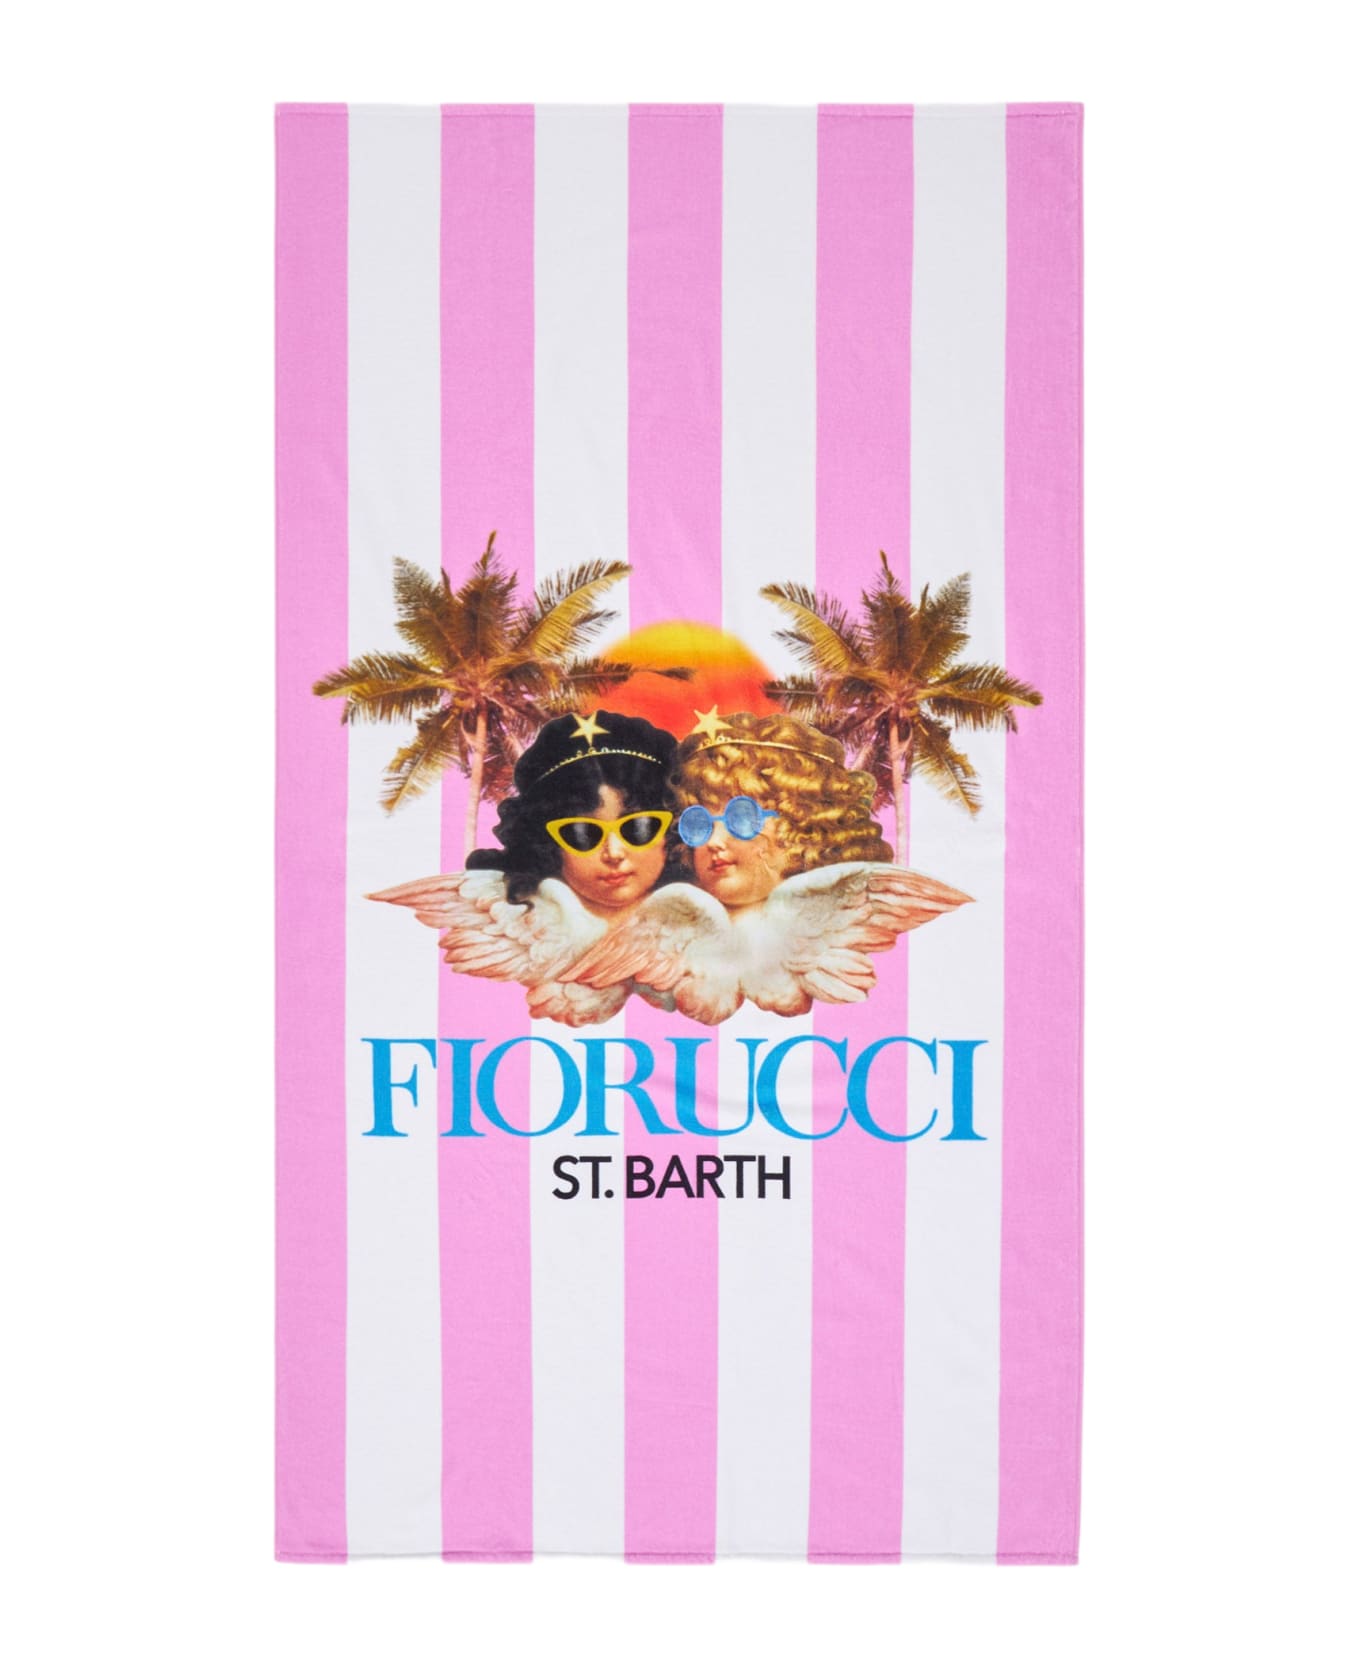 MC2 Saint Barth Printed Soft Terry Beach Towel With Stripes And Fiorucci Angels | Fiorucci Special Edition - PINK